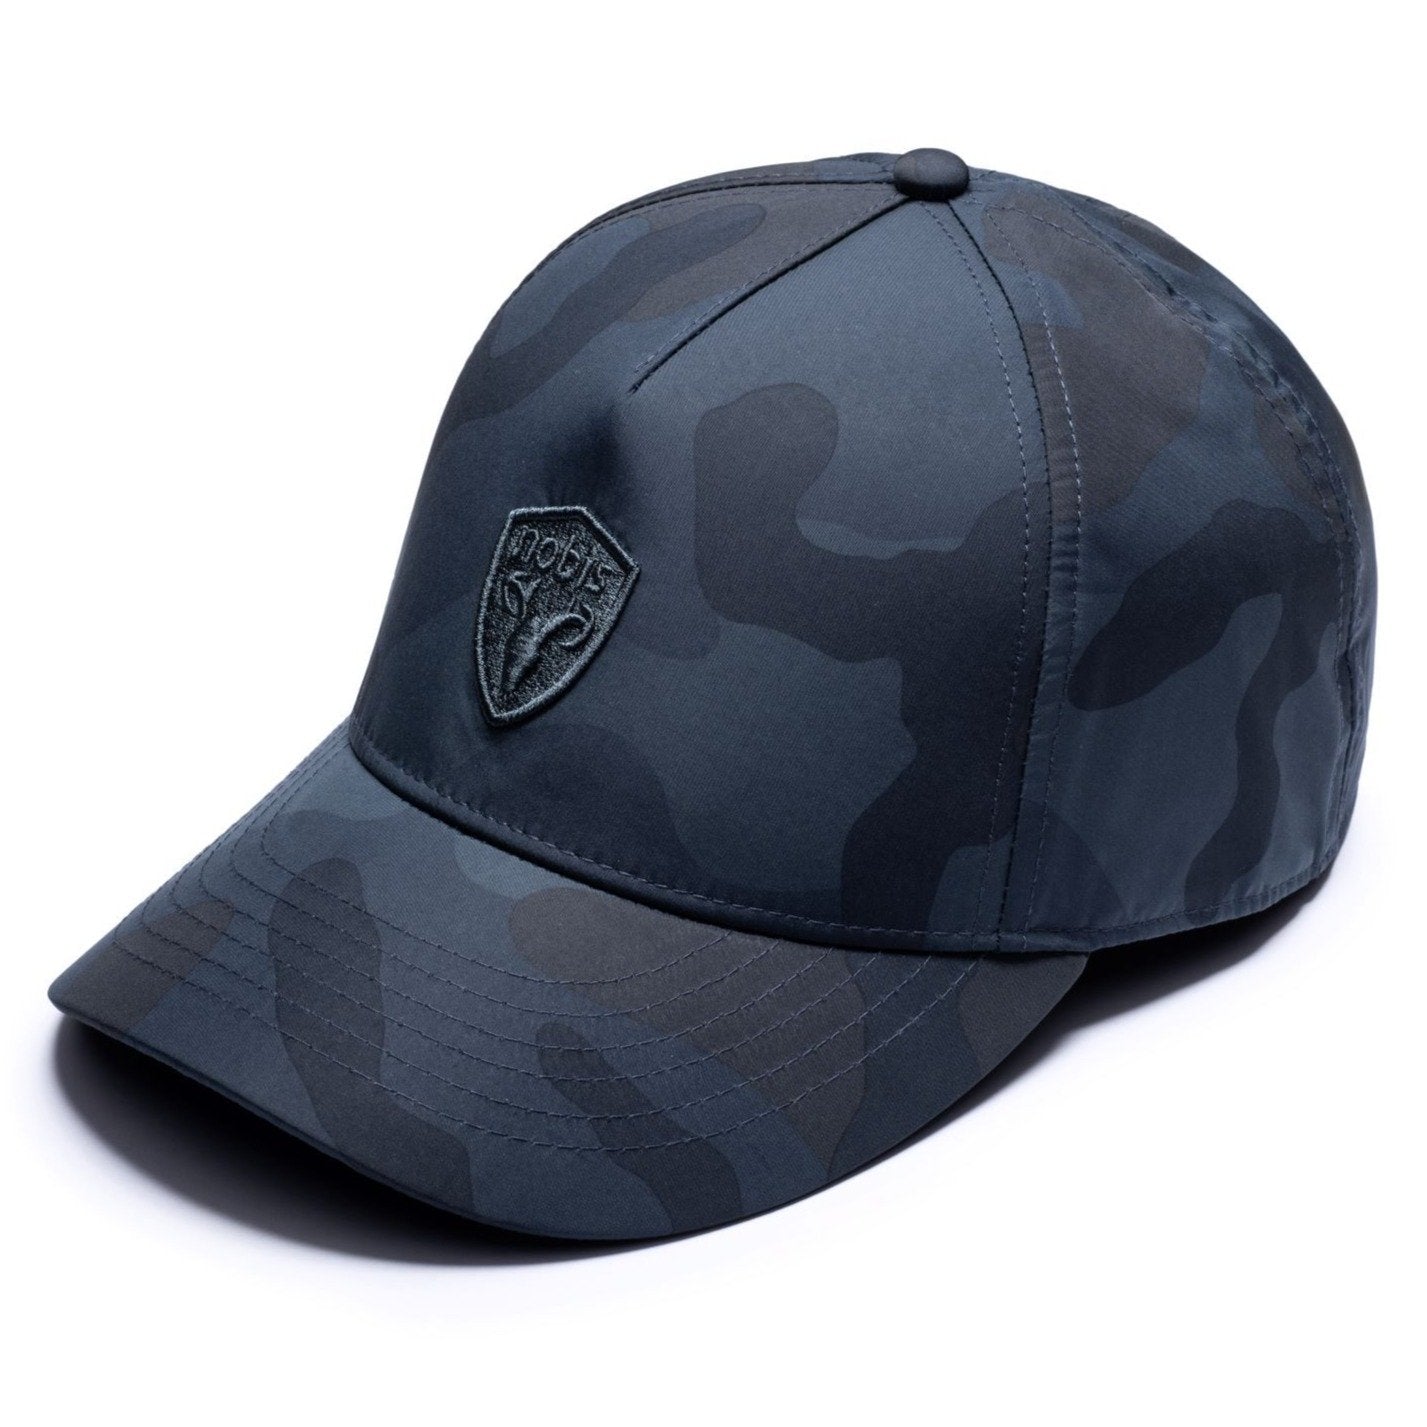 Five panel baseball hat with adjustable back in Navy Camo